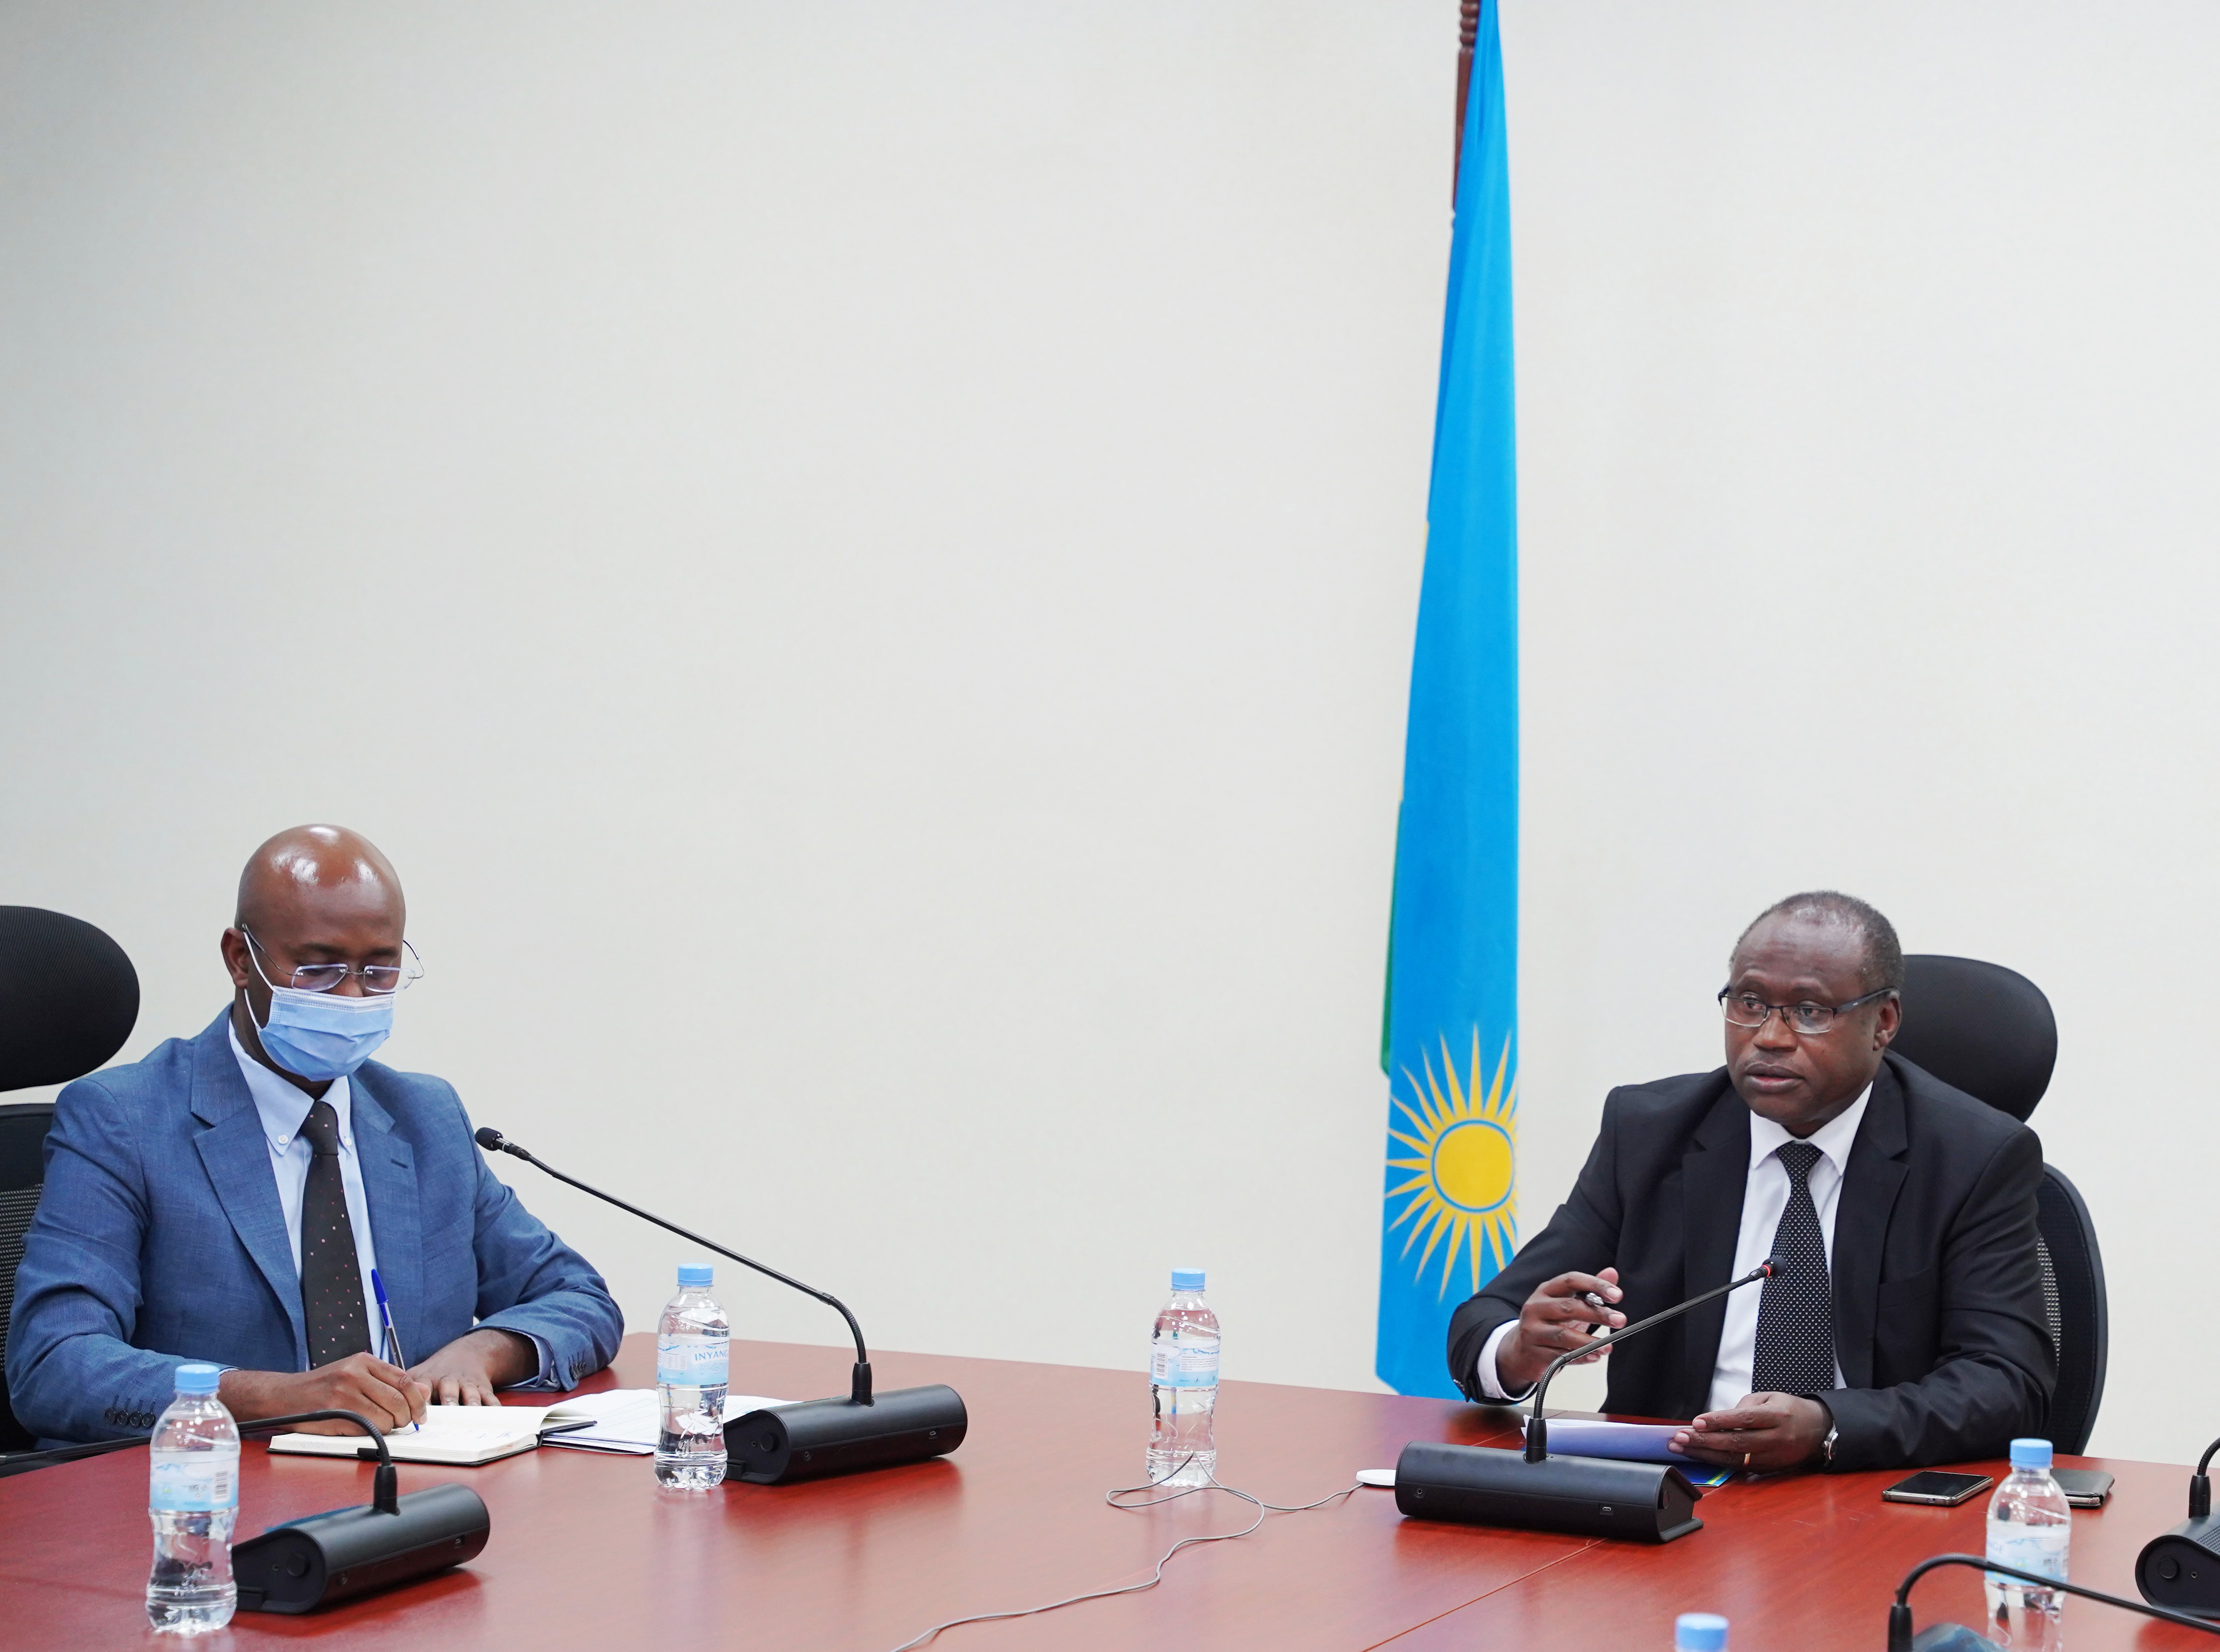 Minister of Finance and Economic Planning, Uzziel Ndagijimana addresses journalists as the National Institute of Statistics of Rwanda releases the report on Rwandau2019s Gross Domestic Product in Kigali on Monday, March 21, 2022. The statistics show that Rwandau2019s GDP grew by 10.9 per cent in 2021 to reach Rwf10,944 billion, up from a contraction of 3.4 per cent in 2020. 